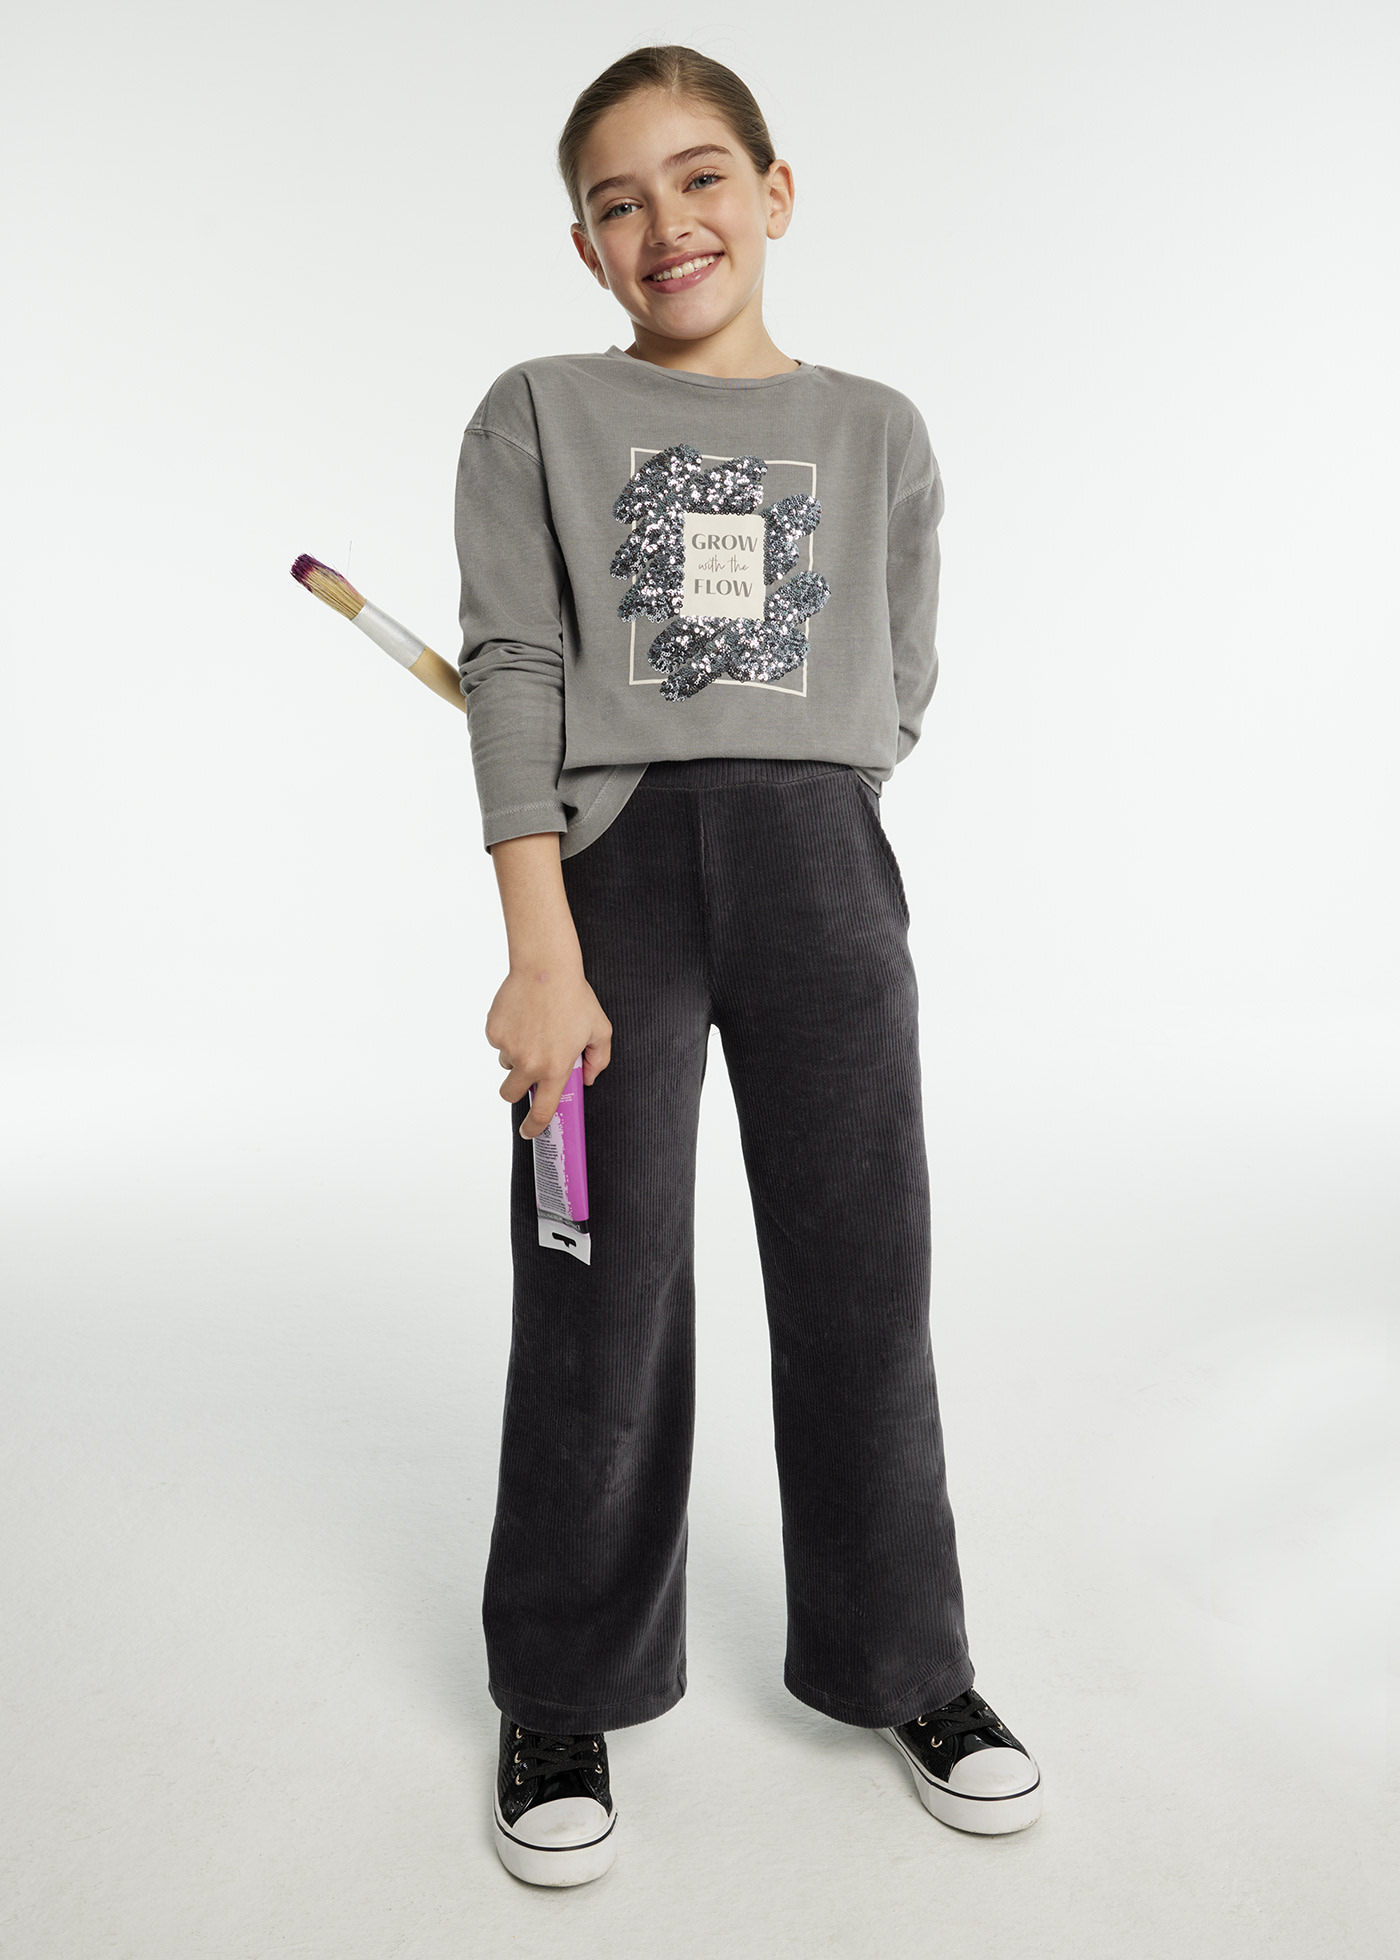 Flared corduroy knit pants for girls